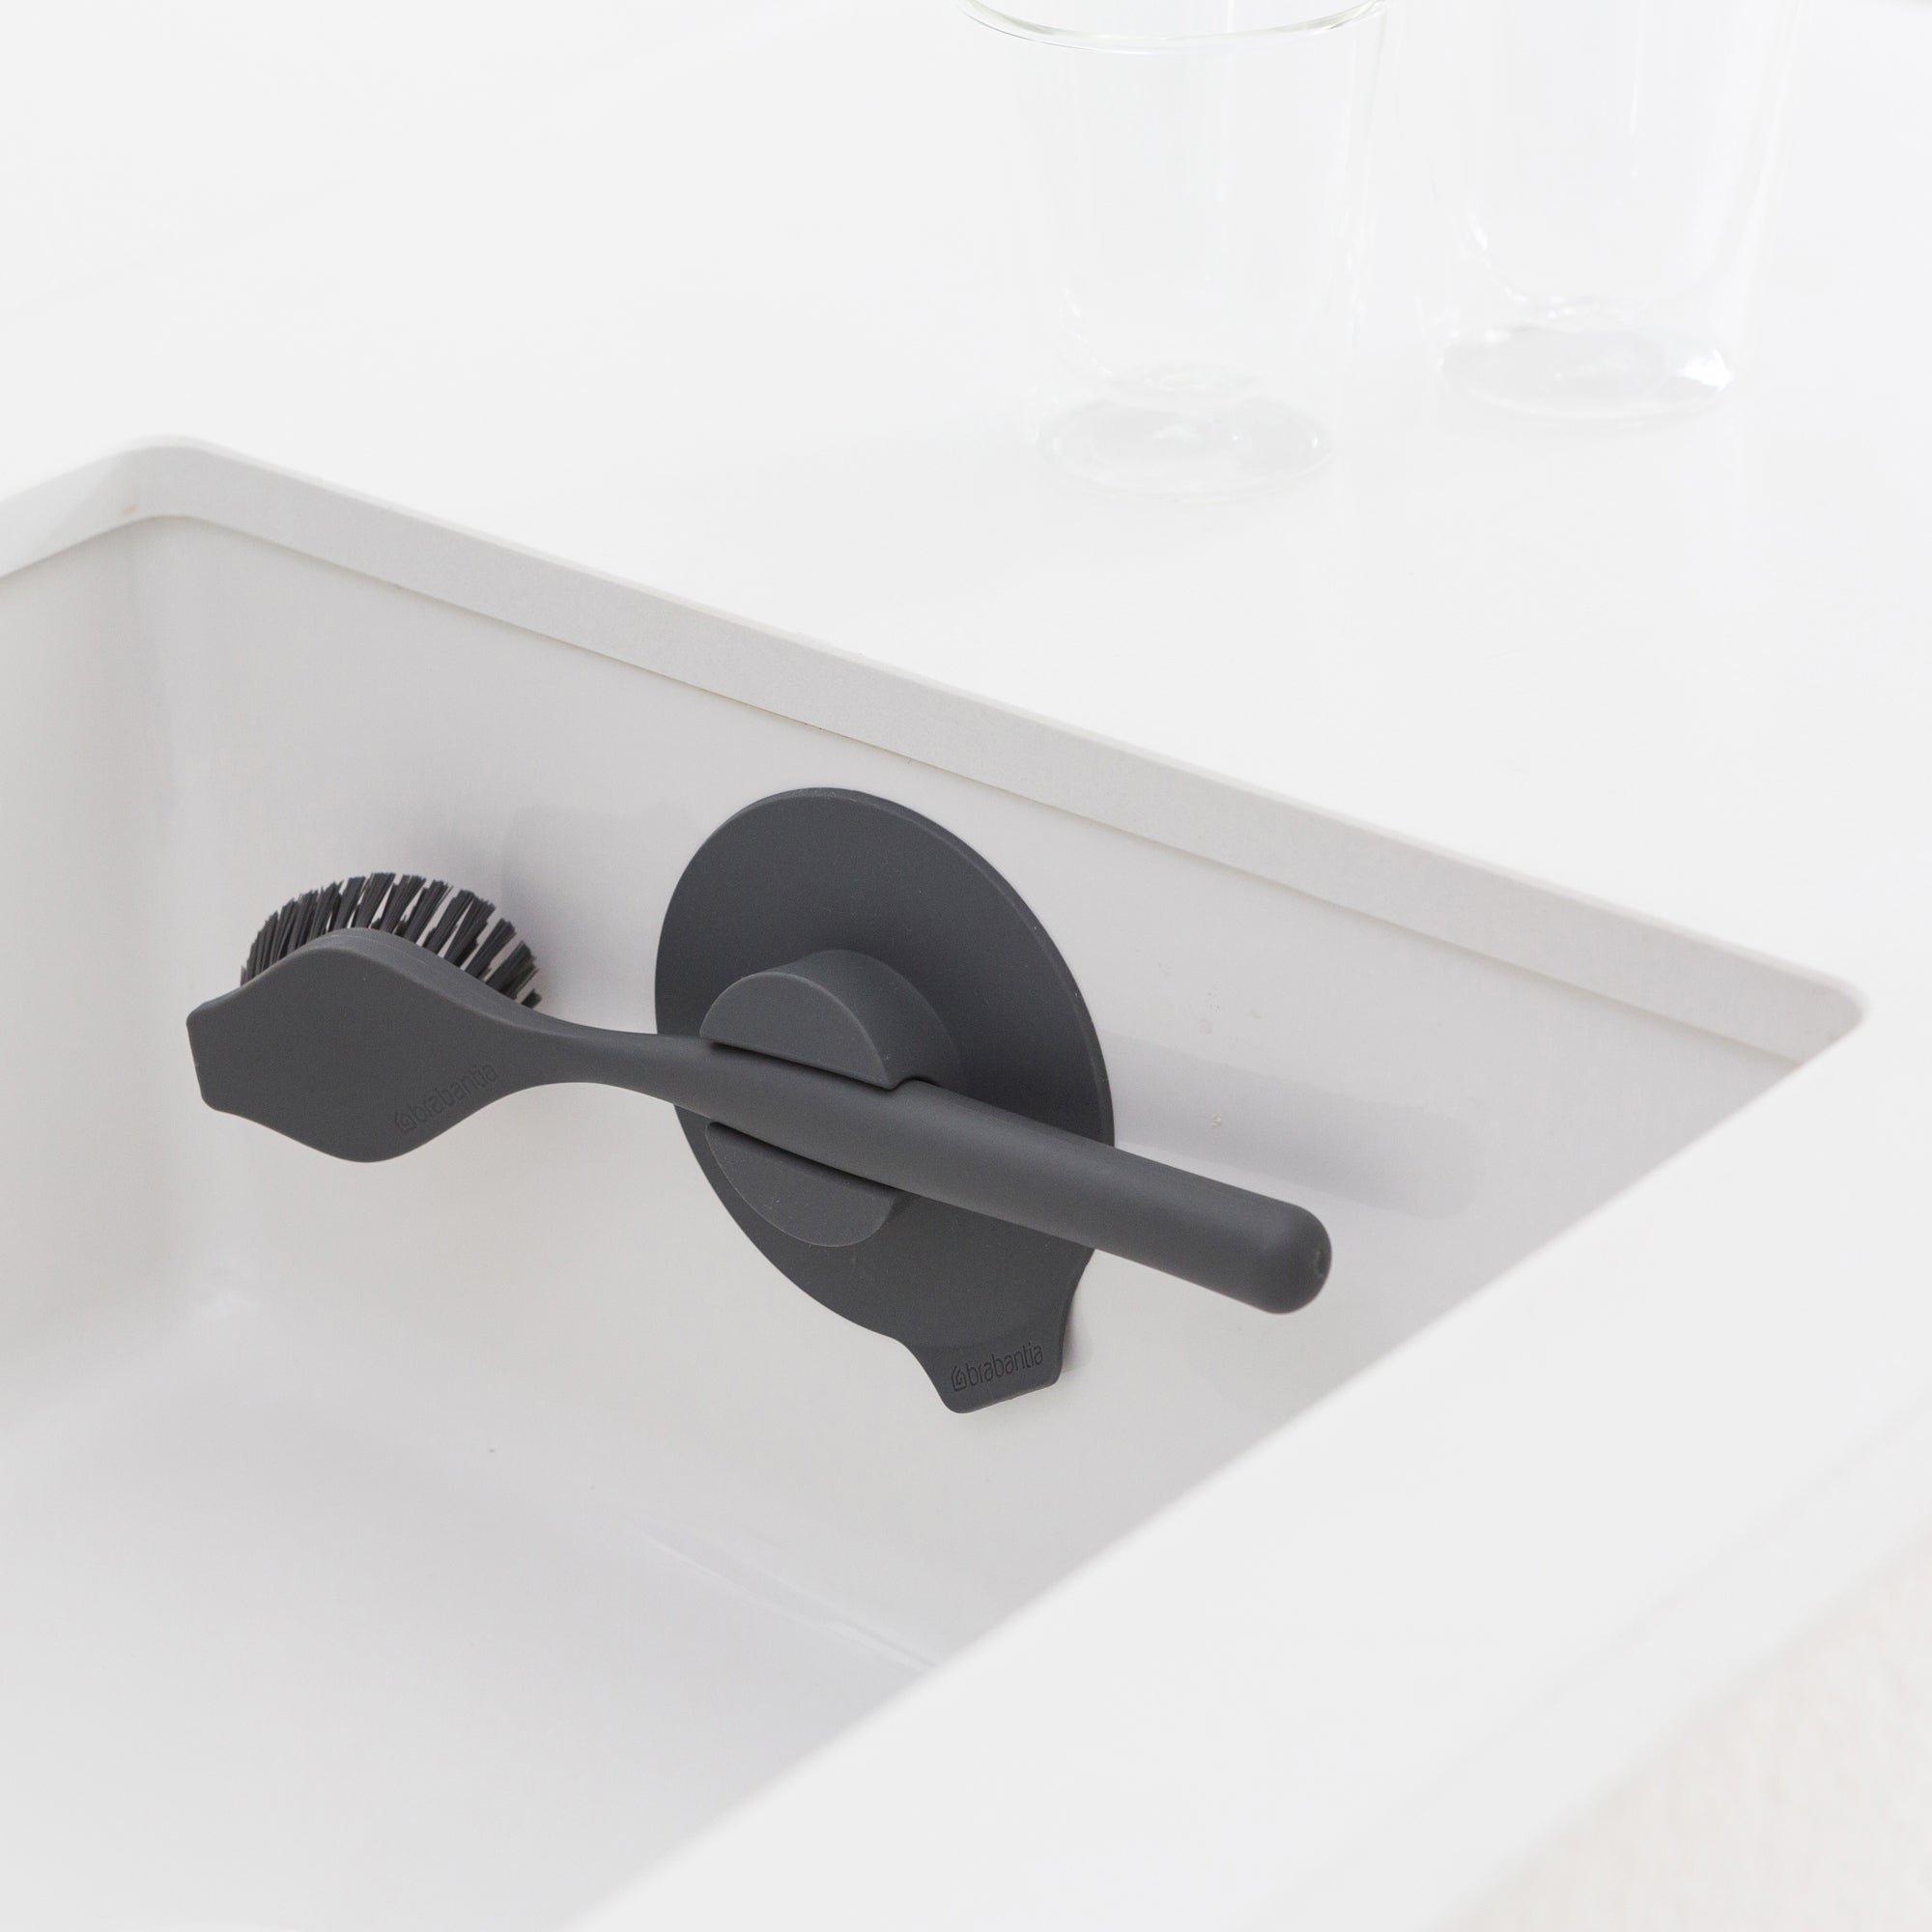 Photos - Cleaning Agent Brabantia Sinkside Dark Grey Dish Brush with Suction Cup Holder Grey 